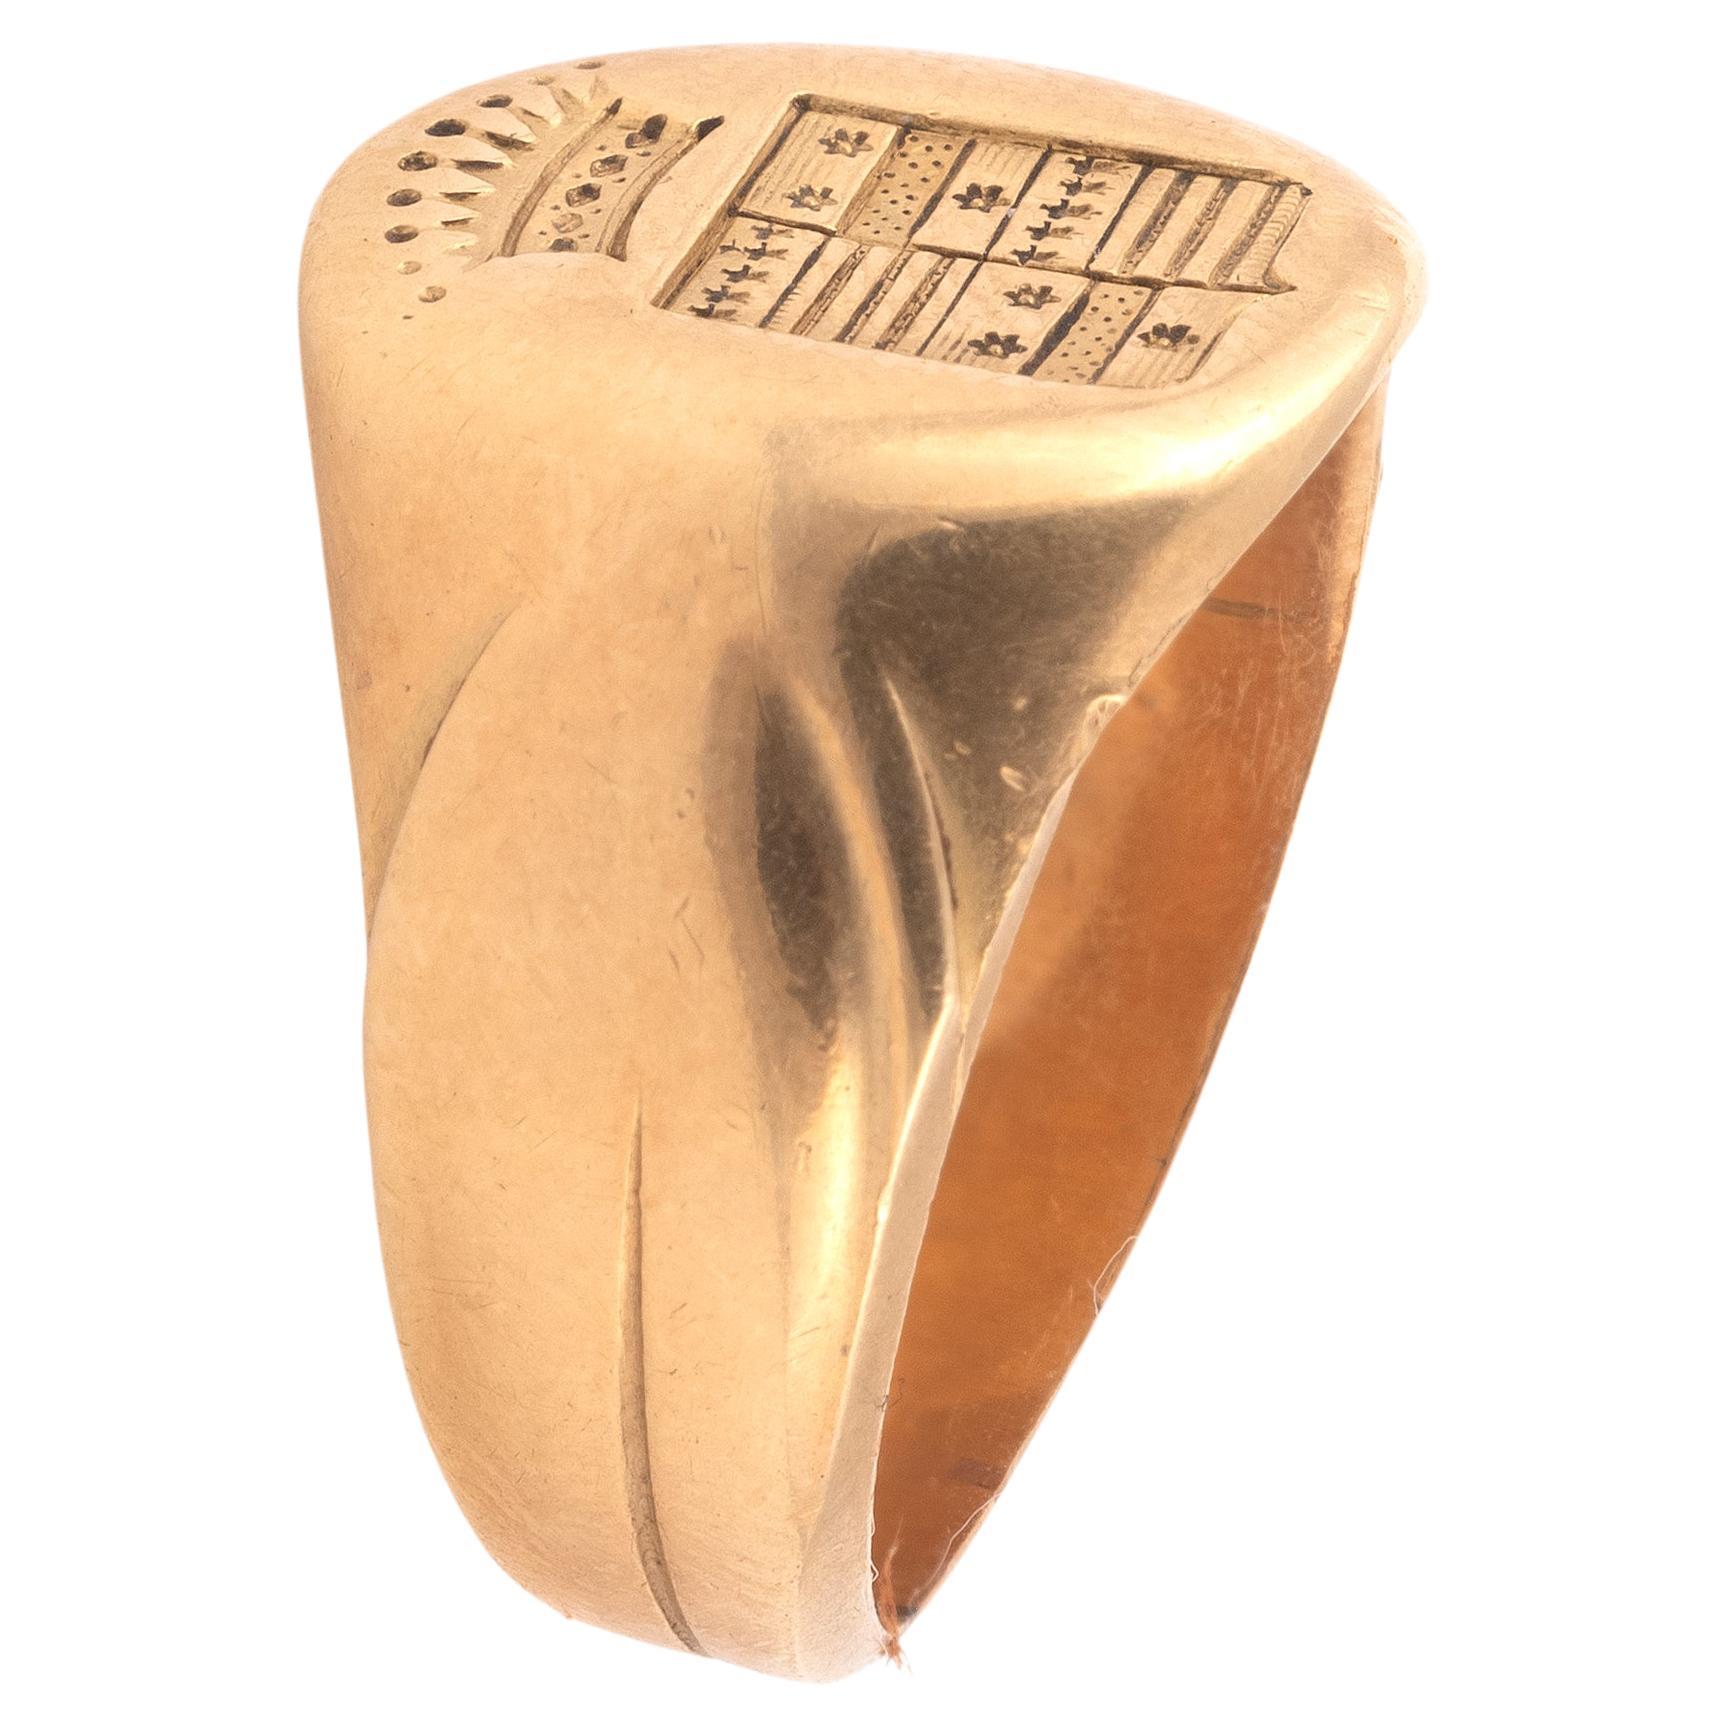 Signet ring in 18kt yellow gold, the center engraved with coats of arms (wear and scaling marks). Ring size: 8 - Gross weight: 12 g